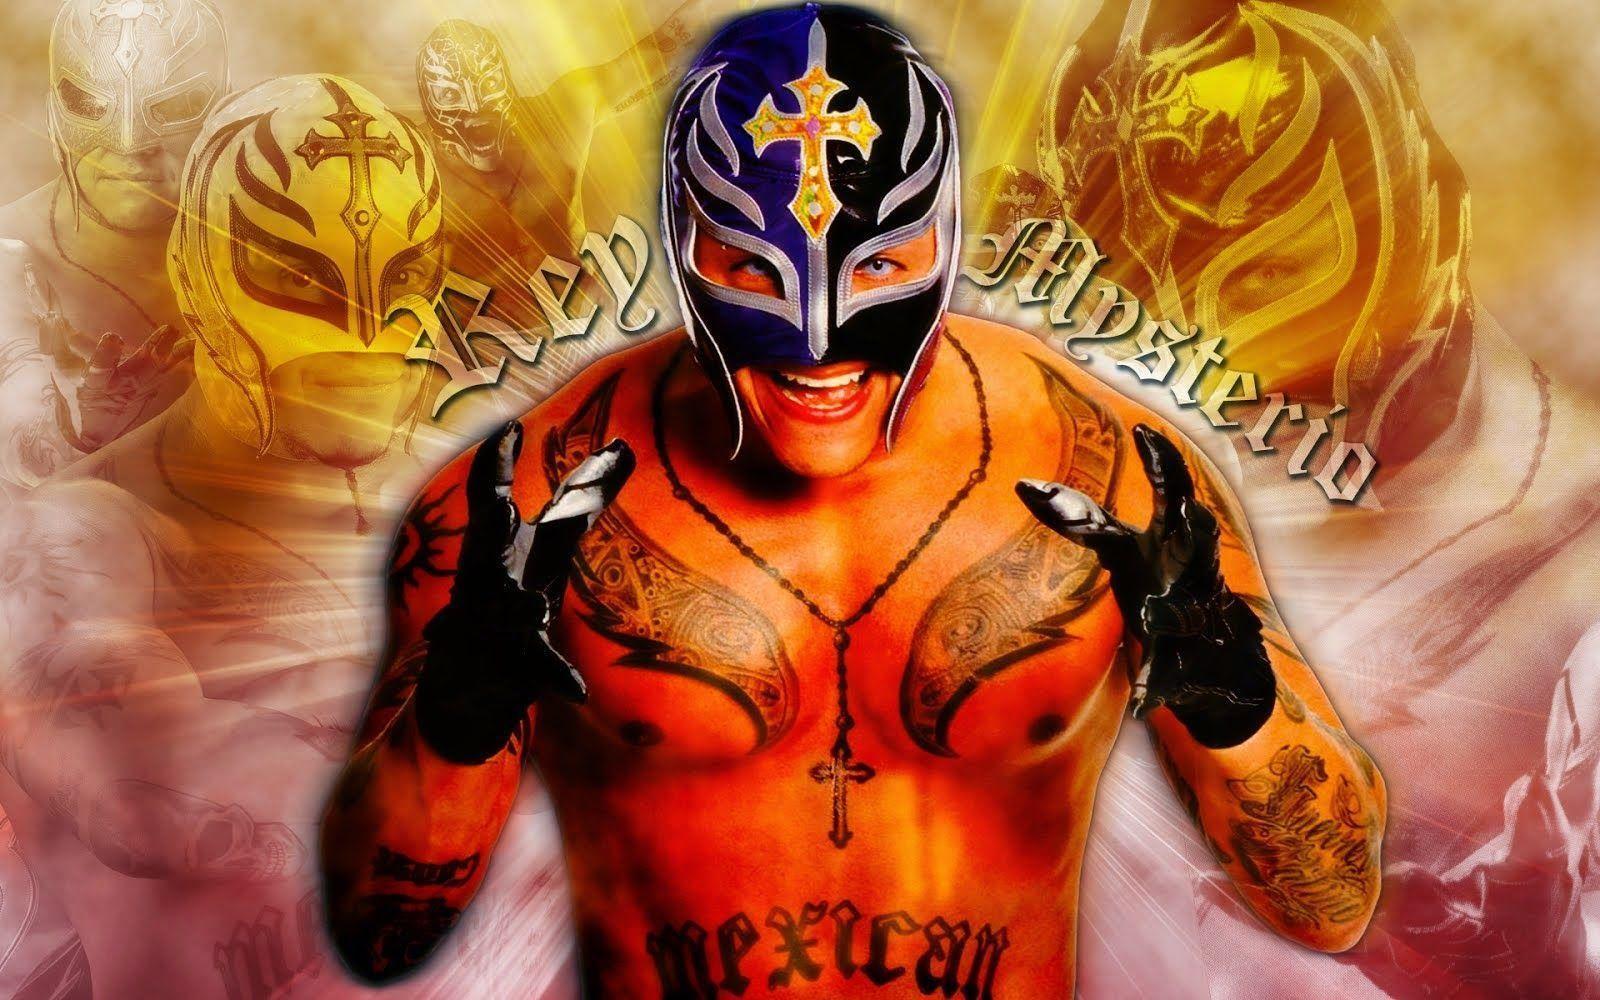 Rey Mysterio Full Hd Wallpapers Wallpaper - Church Of The Annuciation Of The Virgin Mary - HD Wallpaper 